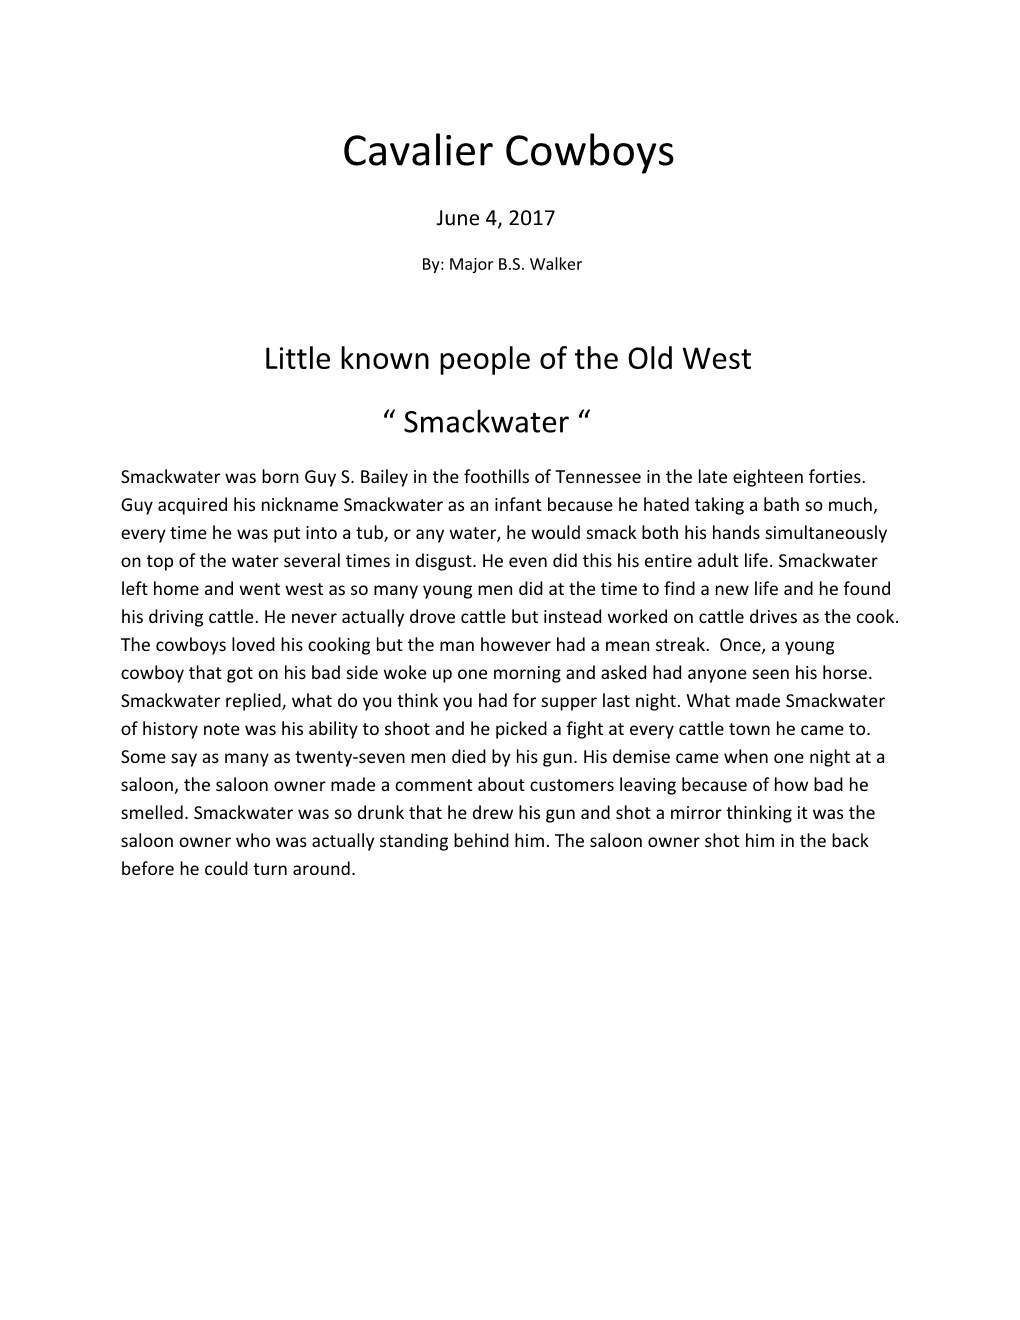 Little Known People of the Old West